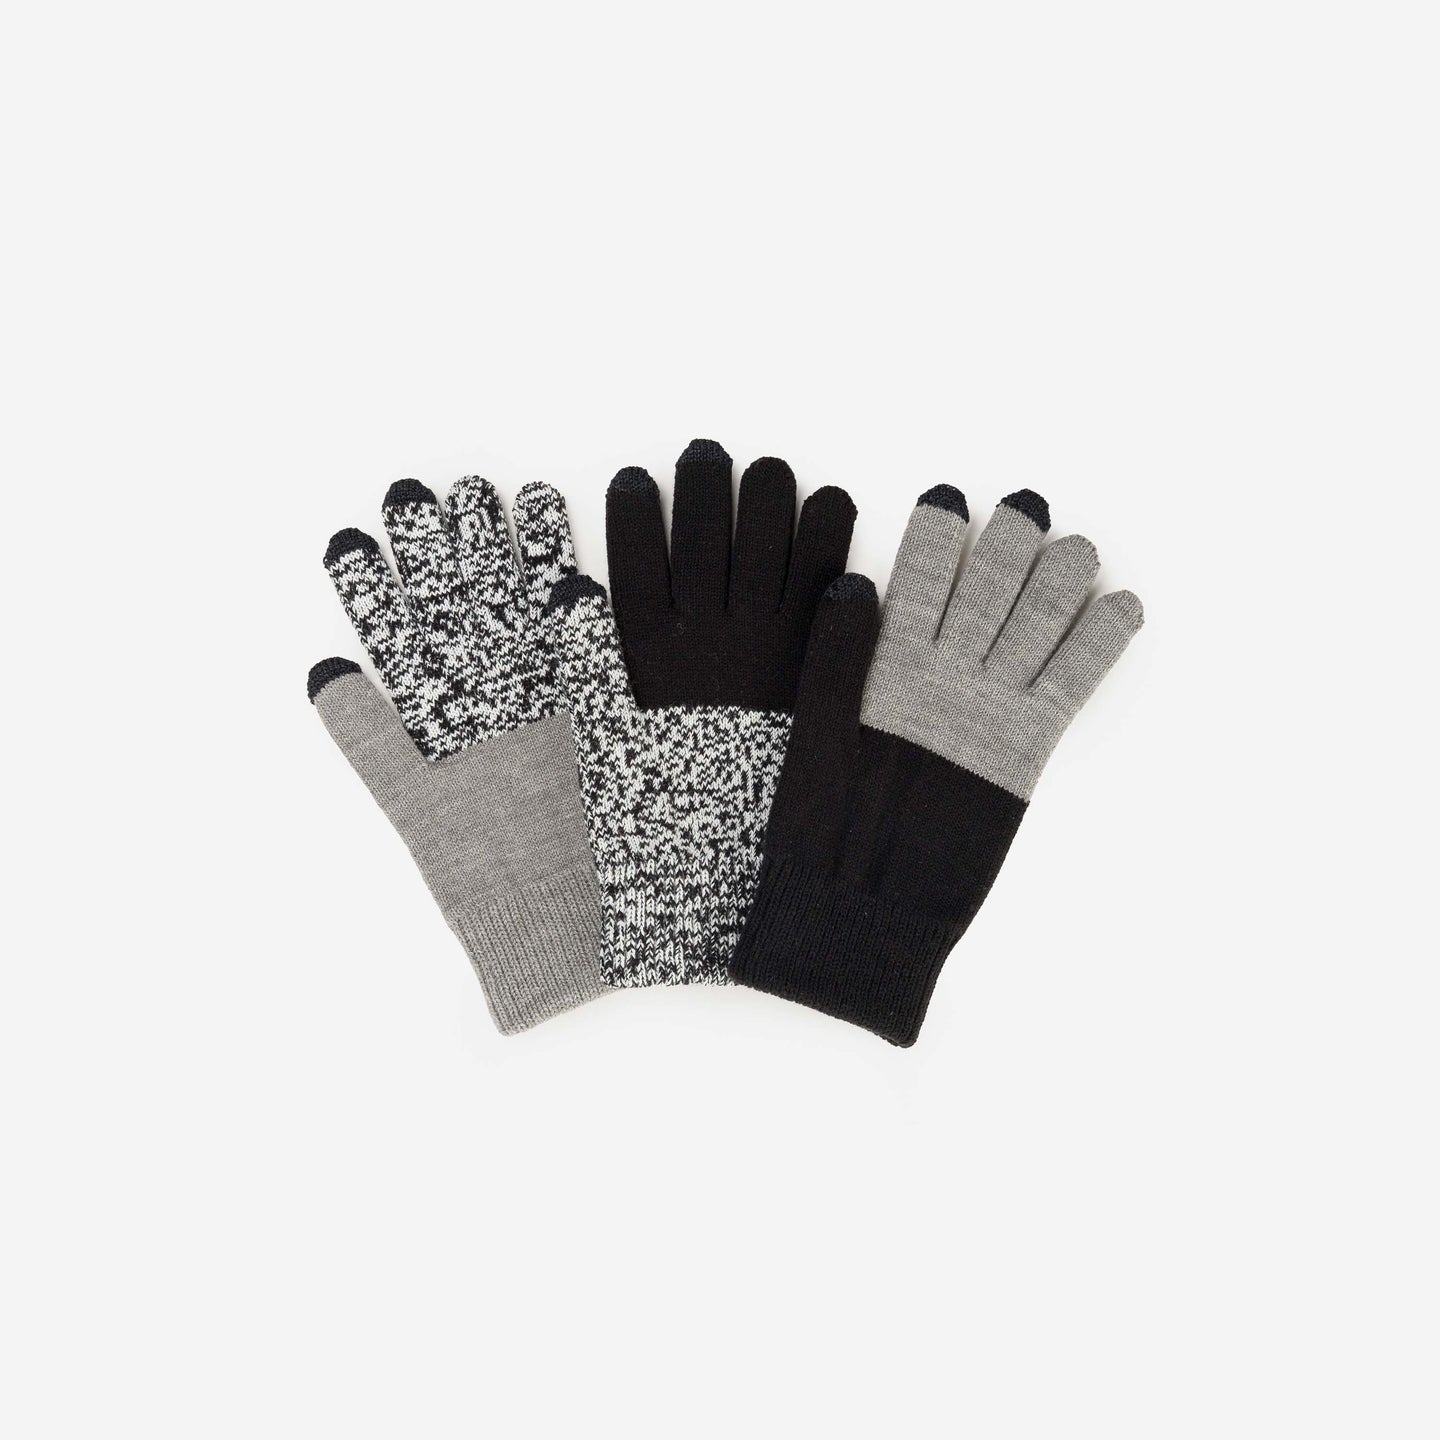 Pair and Spare Gloves Set of 3 Mismatched Gift Winter Gloves